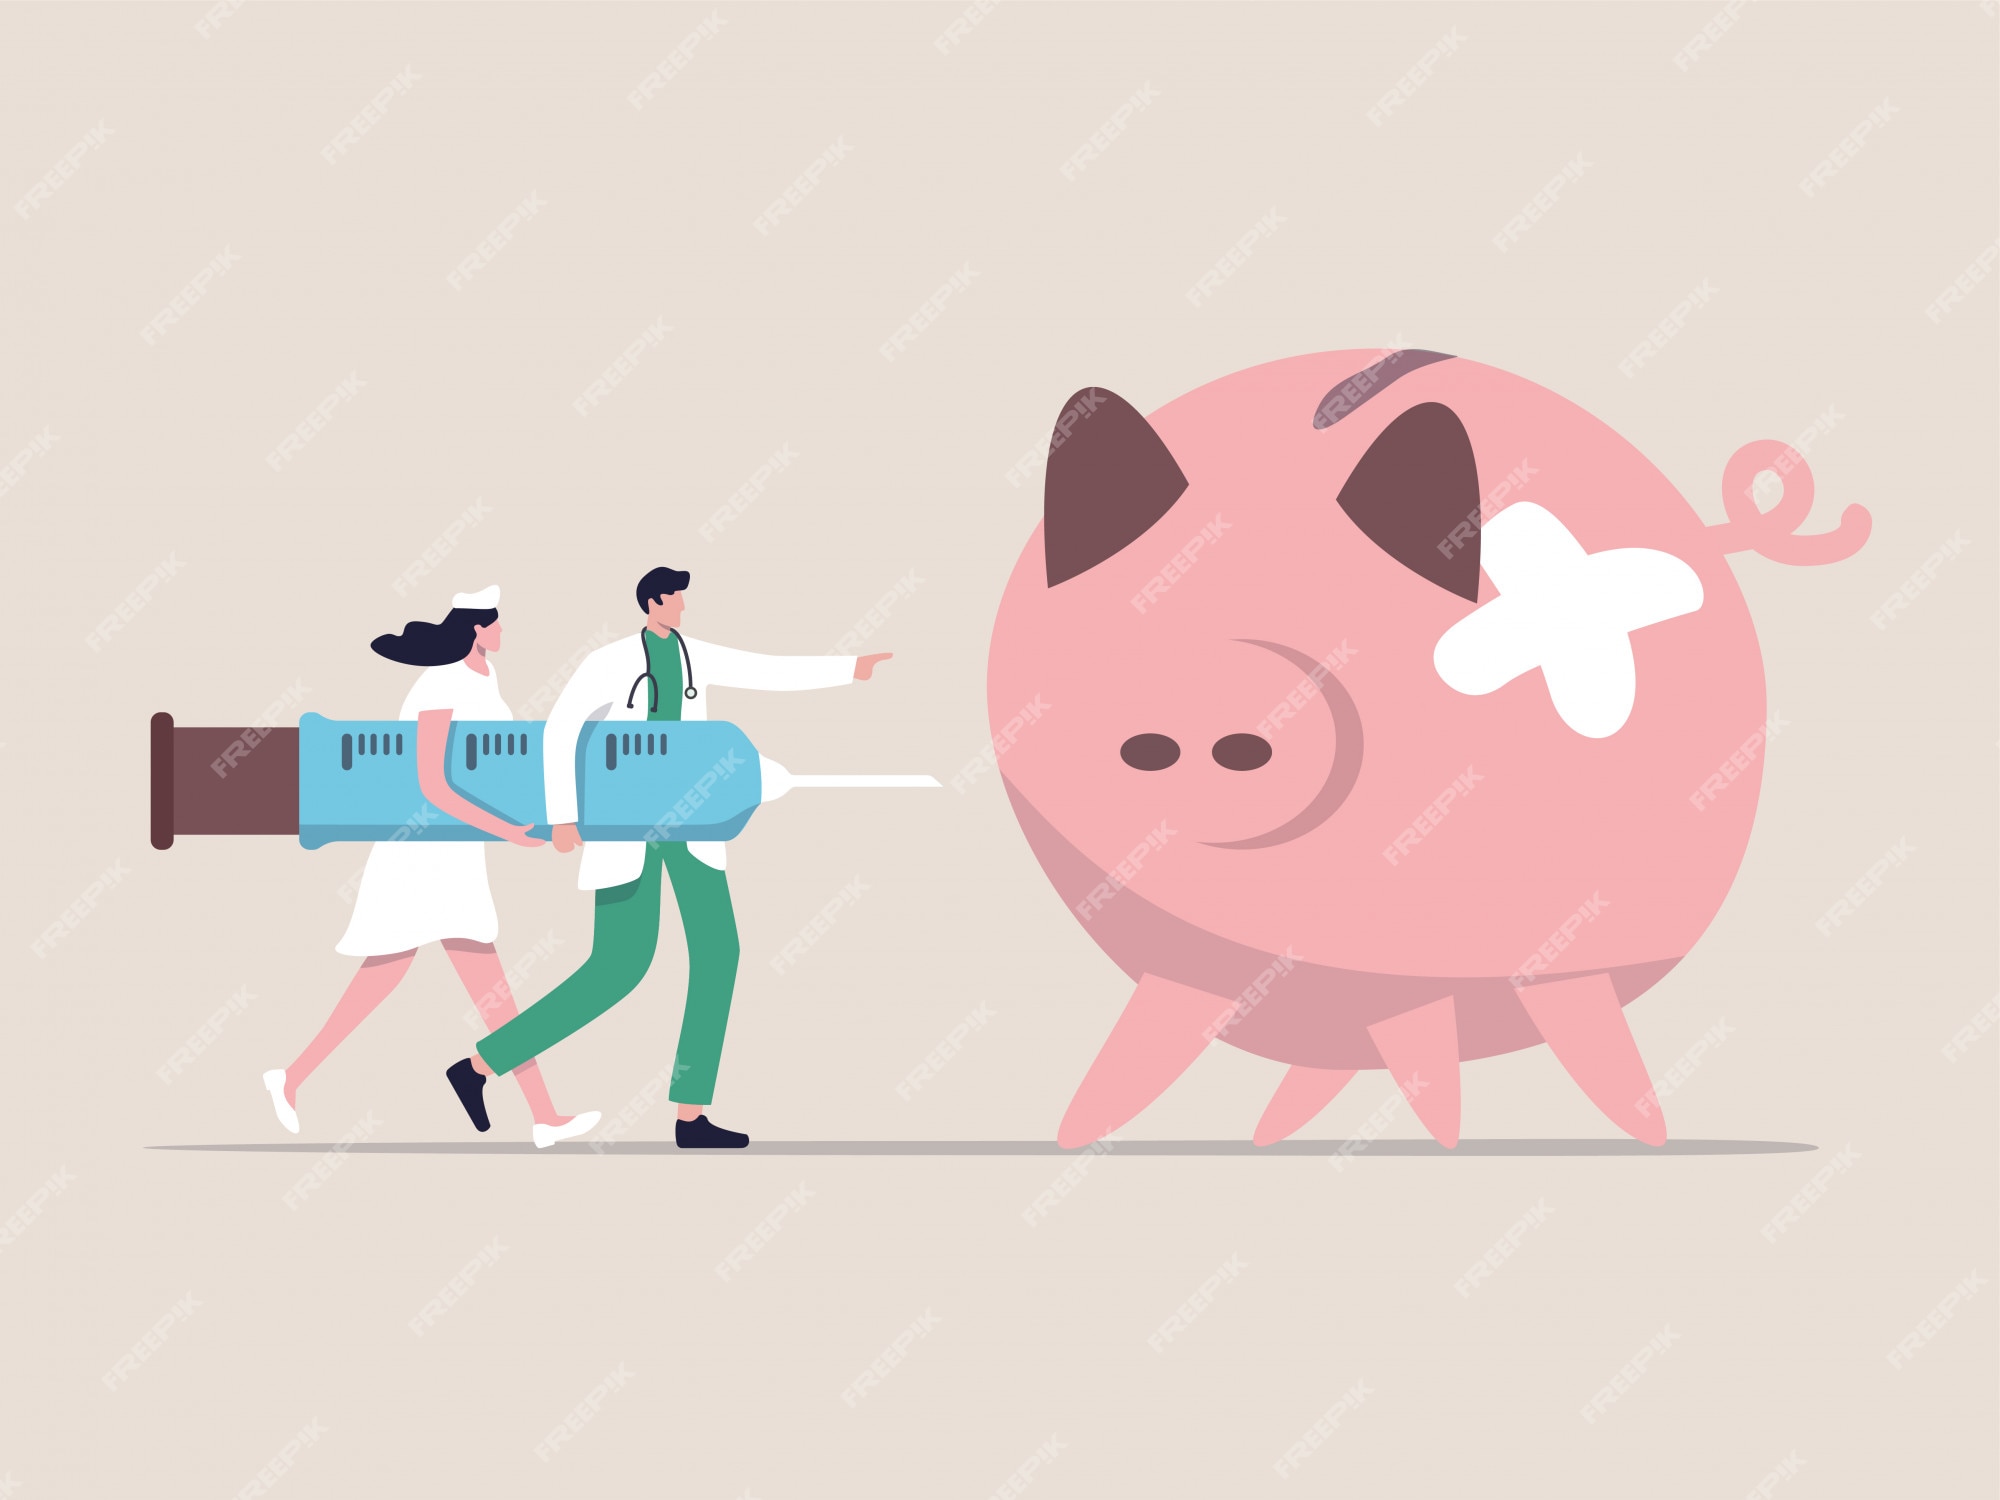 Premium Vector | Economic stimulus, qe quantitative easing, monetary policy  in economic in financial crisis or economic recession, doctor carrying  syringe of medicine or vaccine to inject broken illness piggy bank.